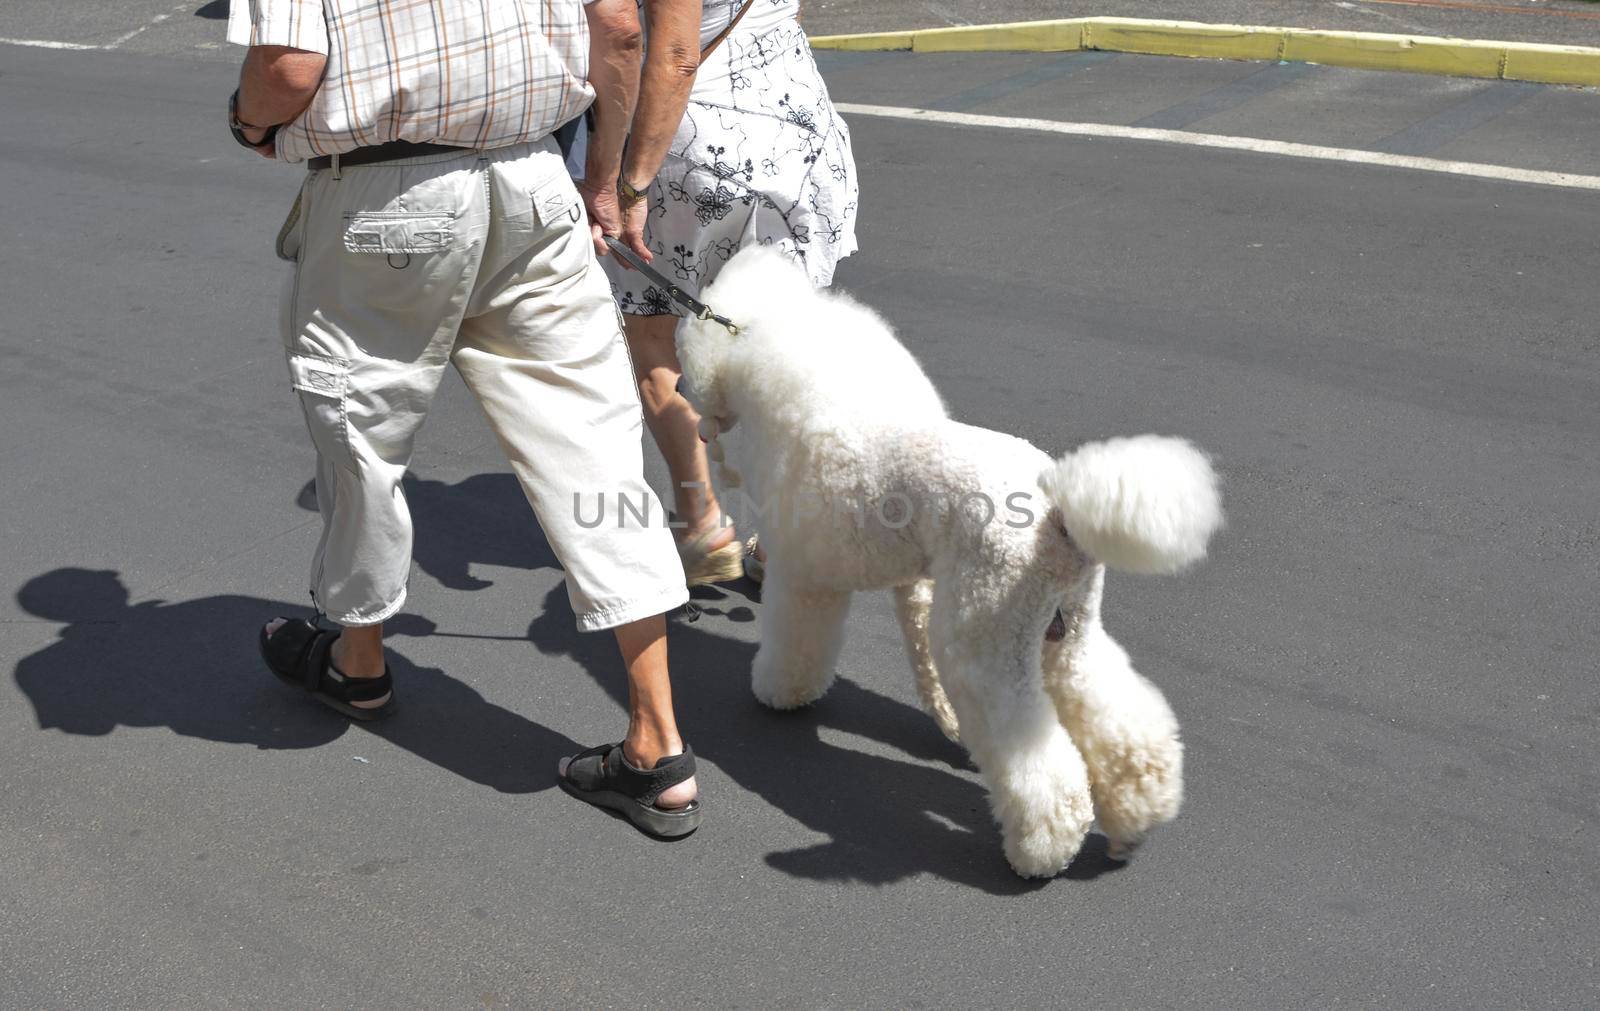 An elderly couple walks with her white poodle on a leash by Godi